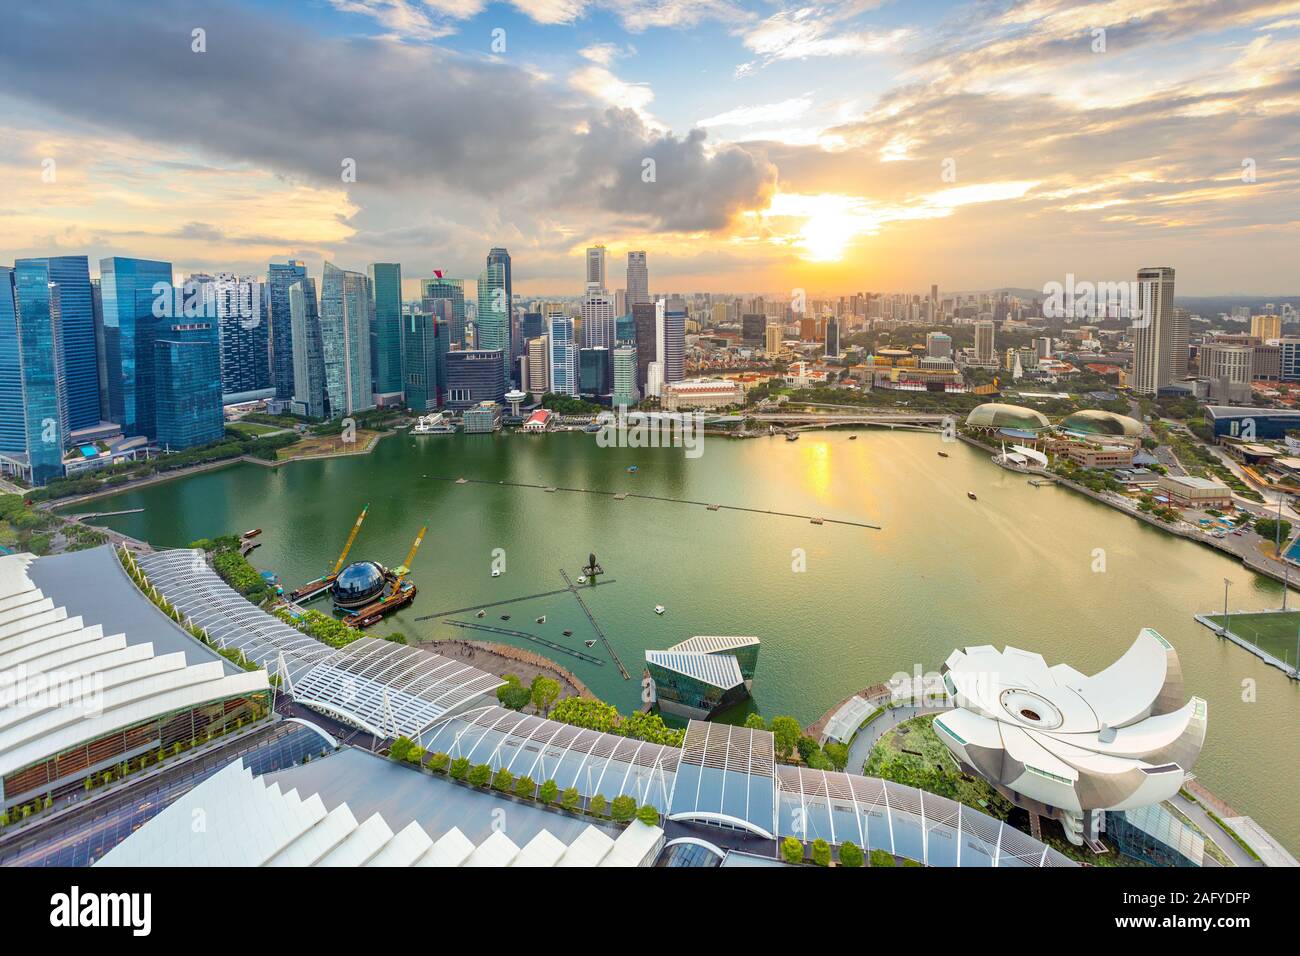 Aerial view of cloudy sunset at Marina Bay Singapore city skyline Stock Photo